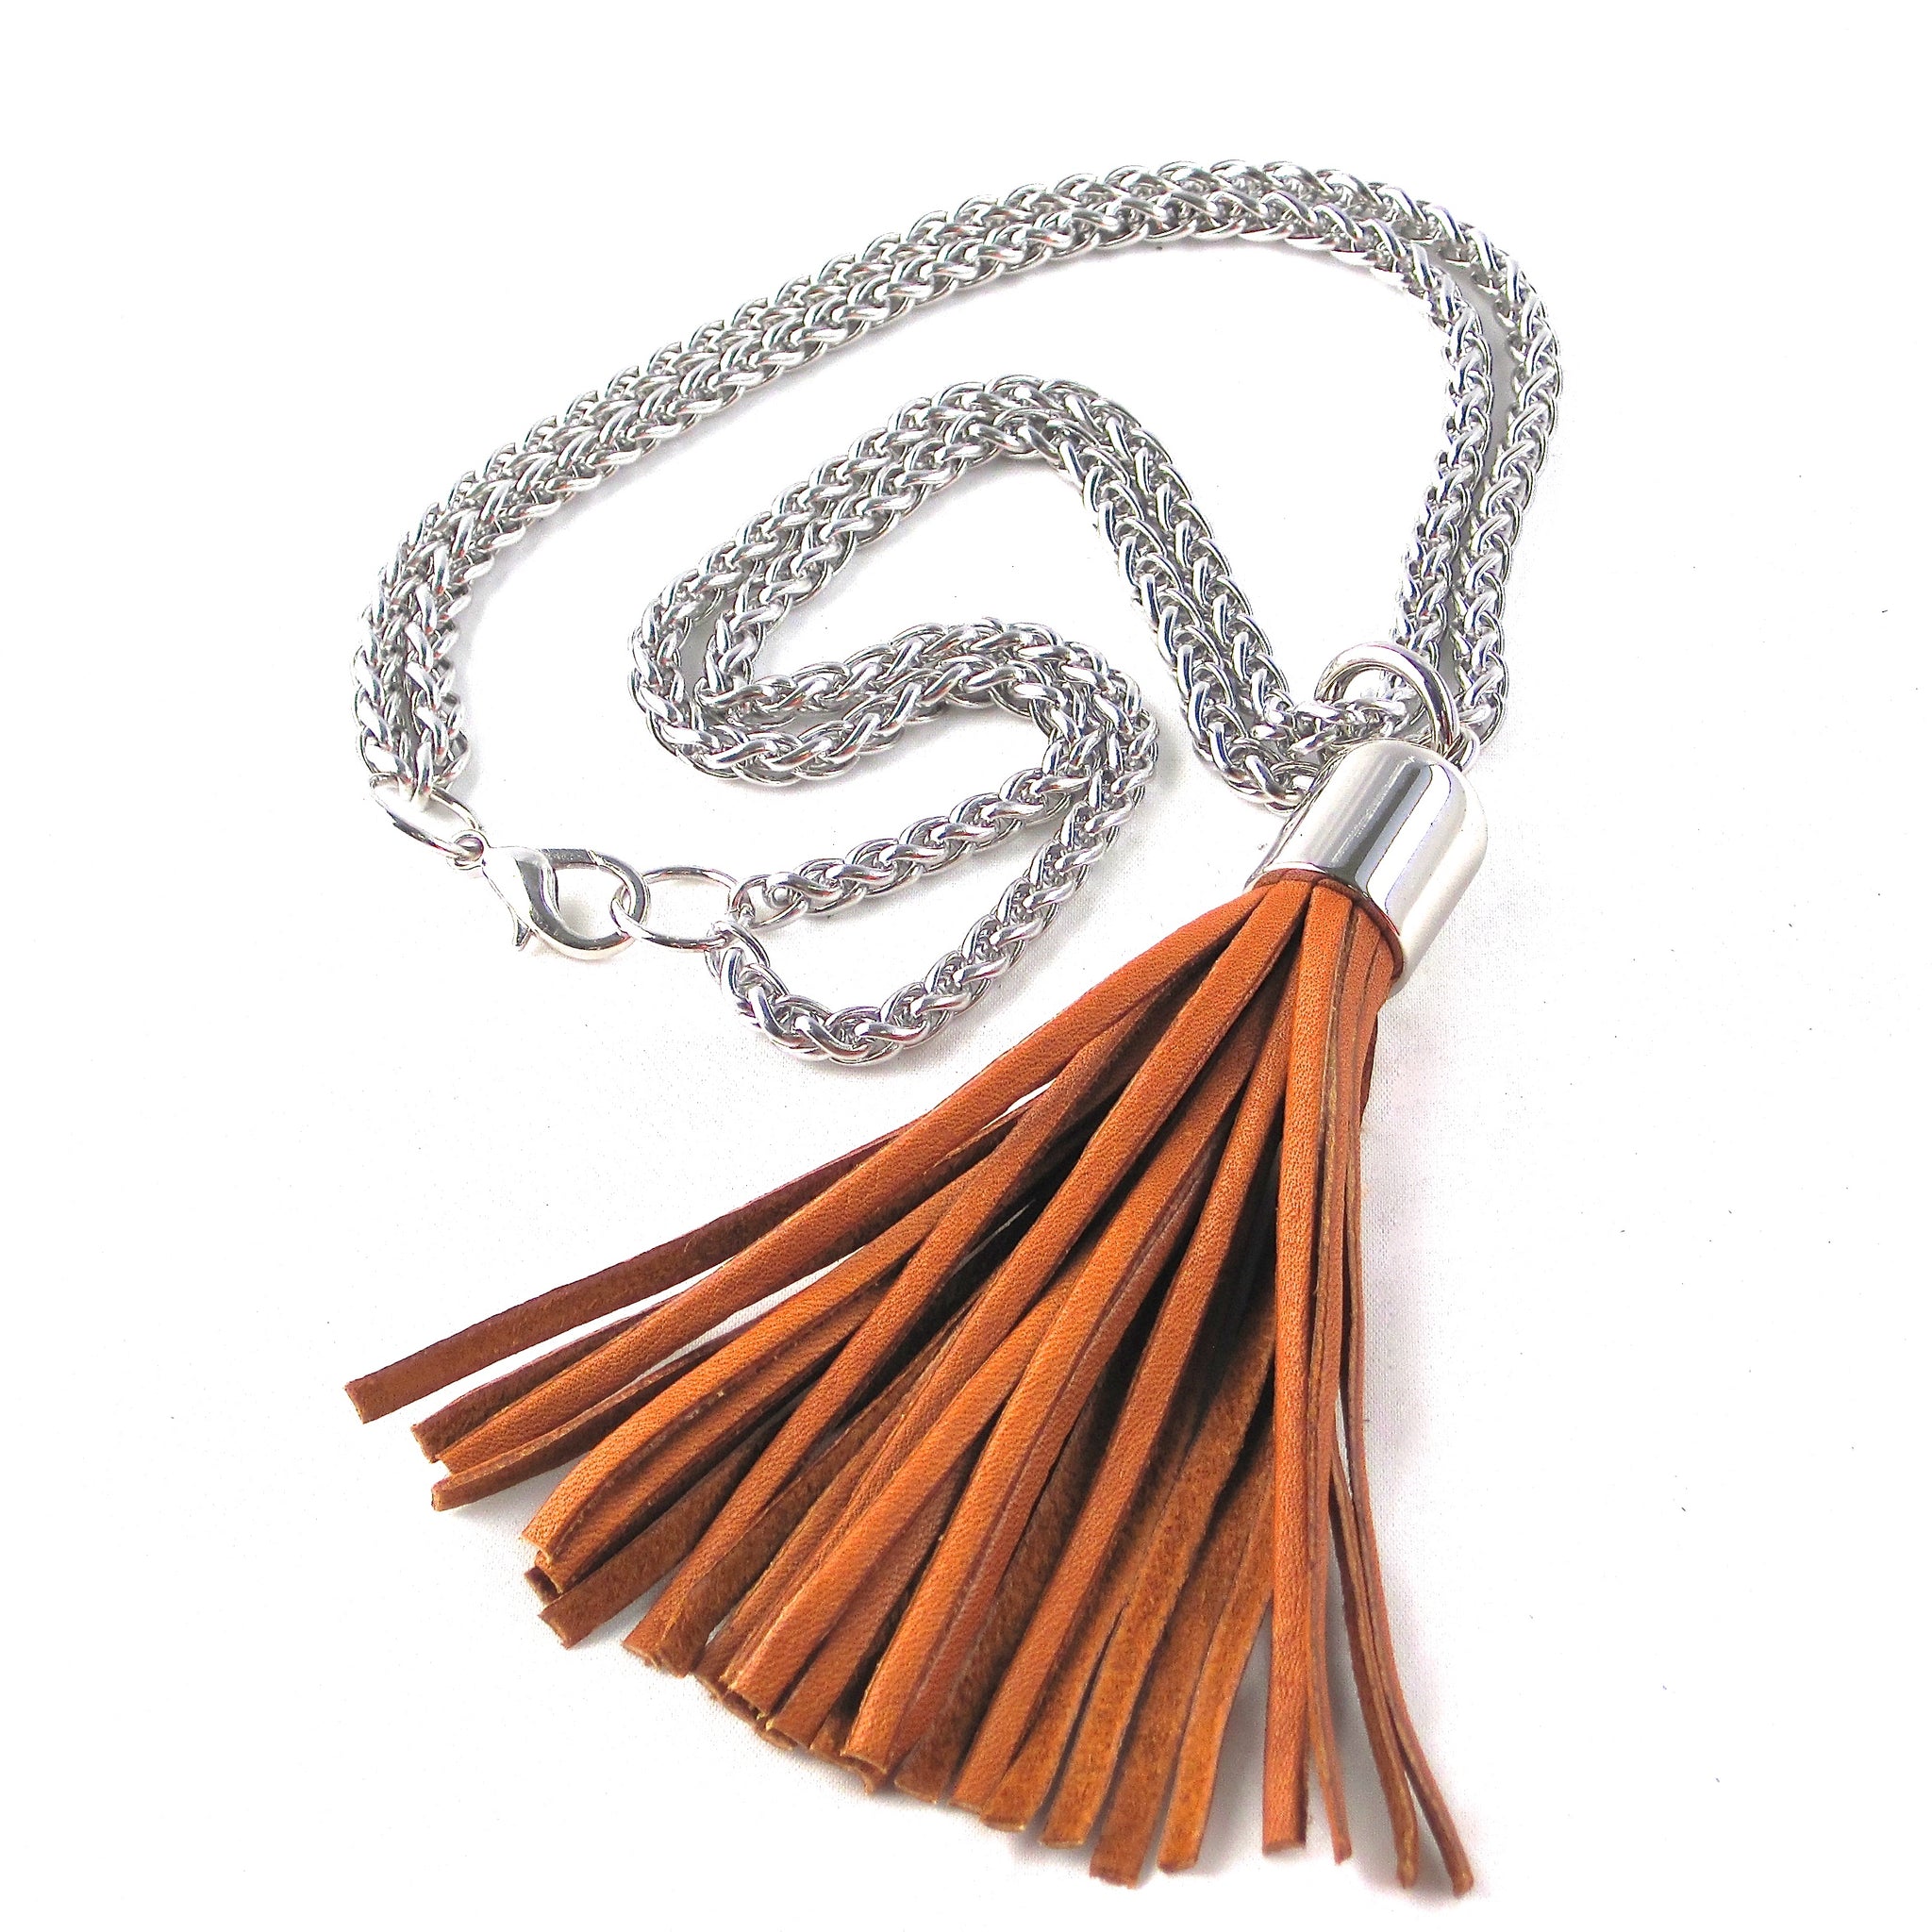 STAINLESS STEEL CHAINS AND LARGE DEERSKIN LEATHER TASSEL NECKLACE by nyet jewelry